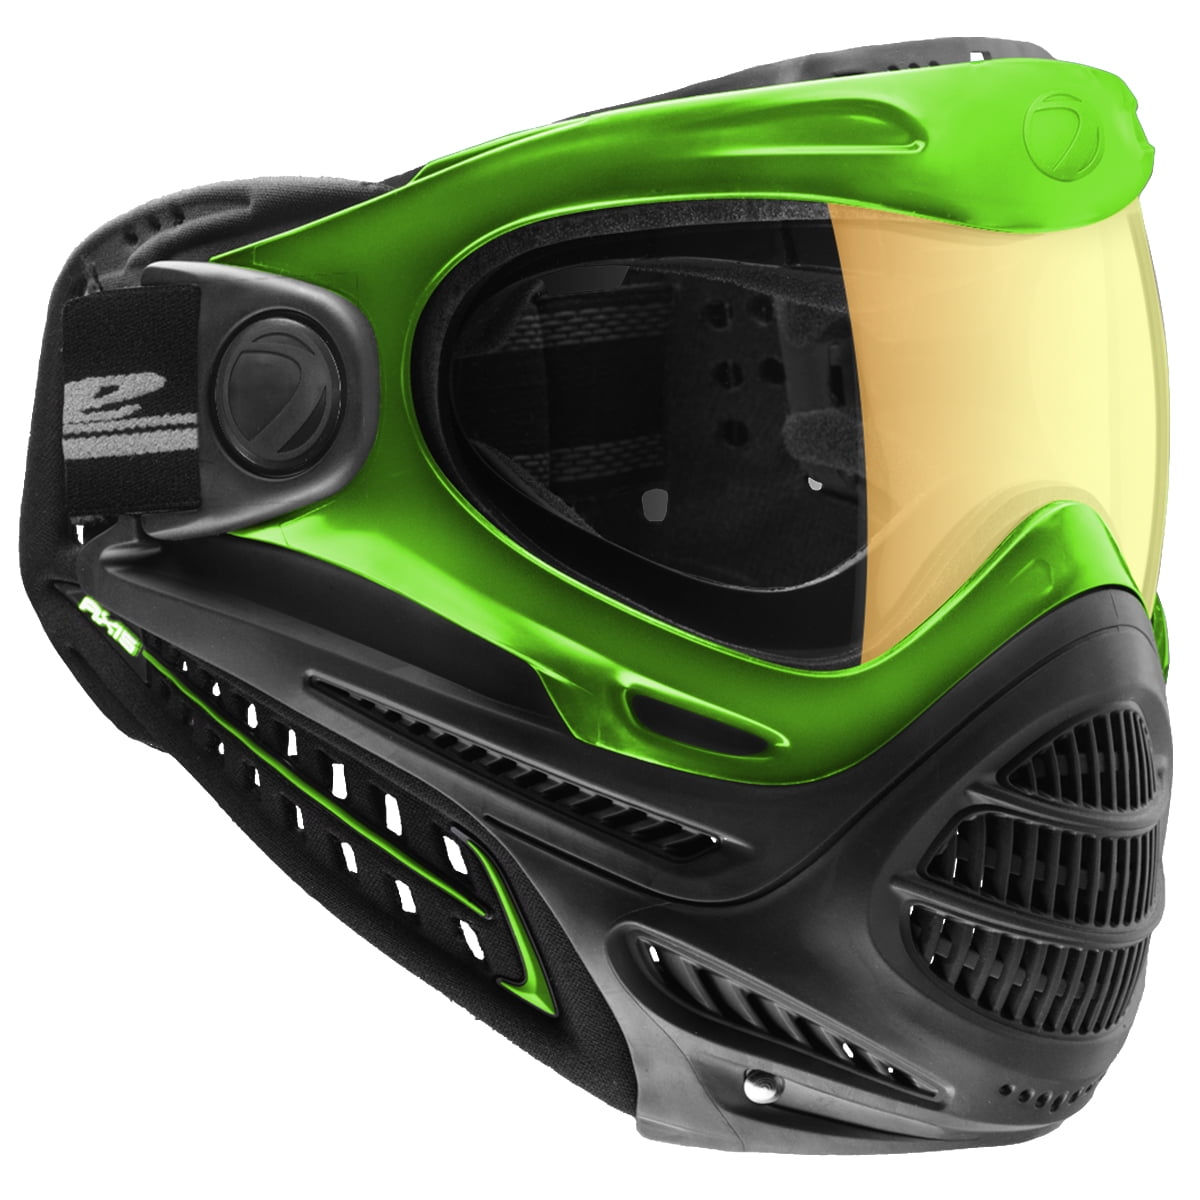 Lime Northern Lights Dye Axis Pro Goggles w/ Thermal Lens 